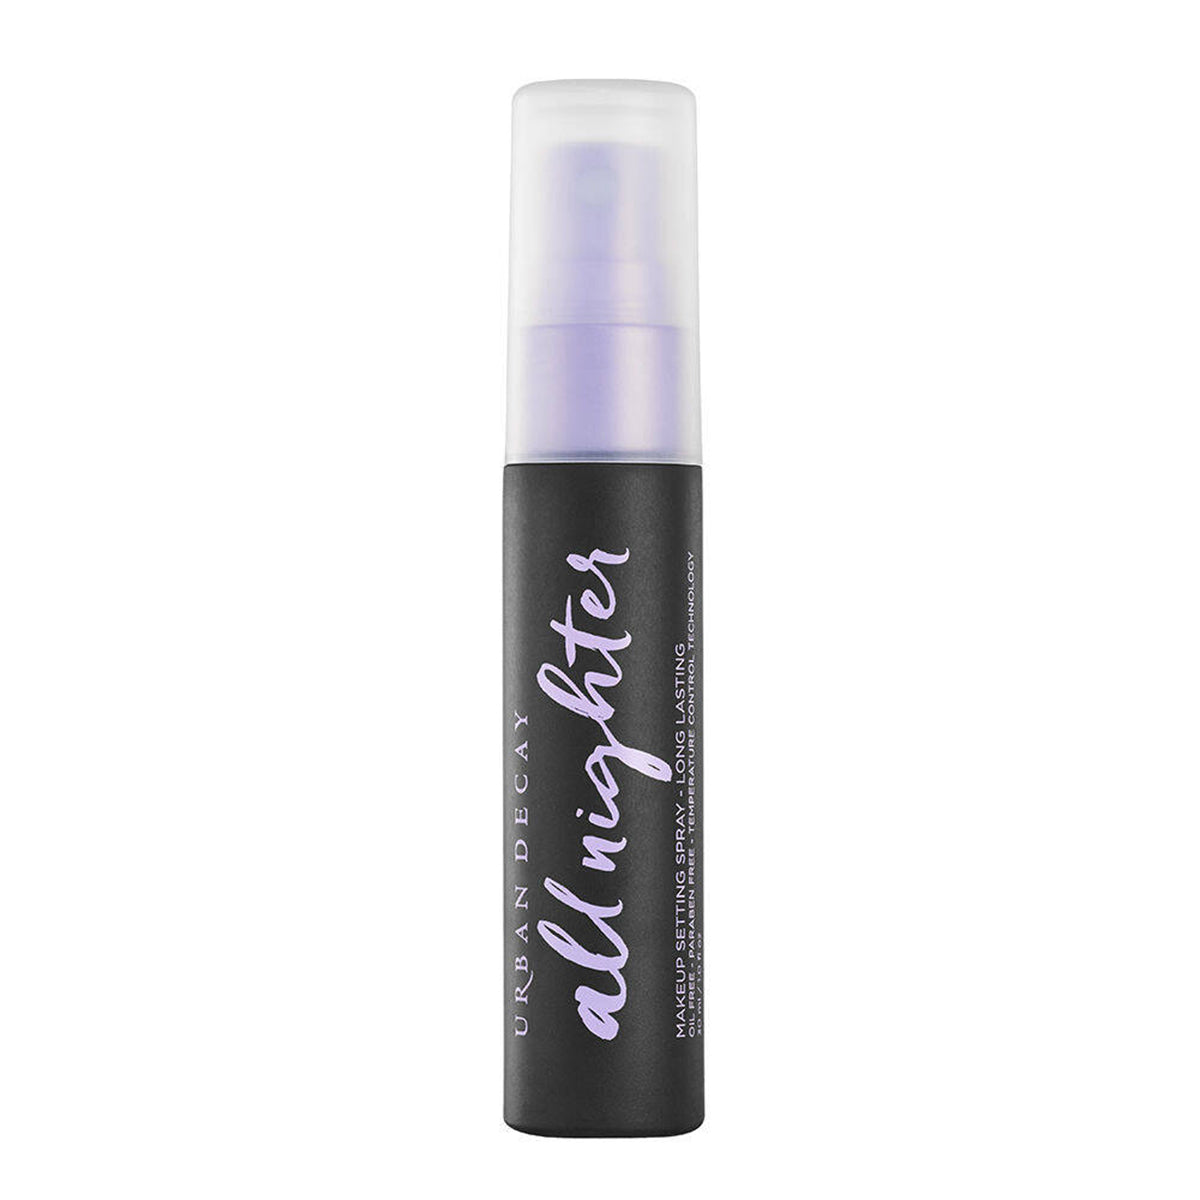 Urban Decay All Nighter Setting Spray Travel Size